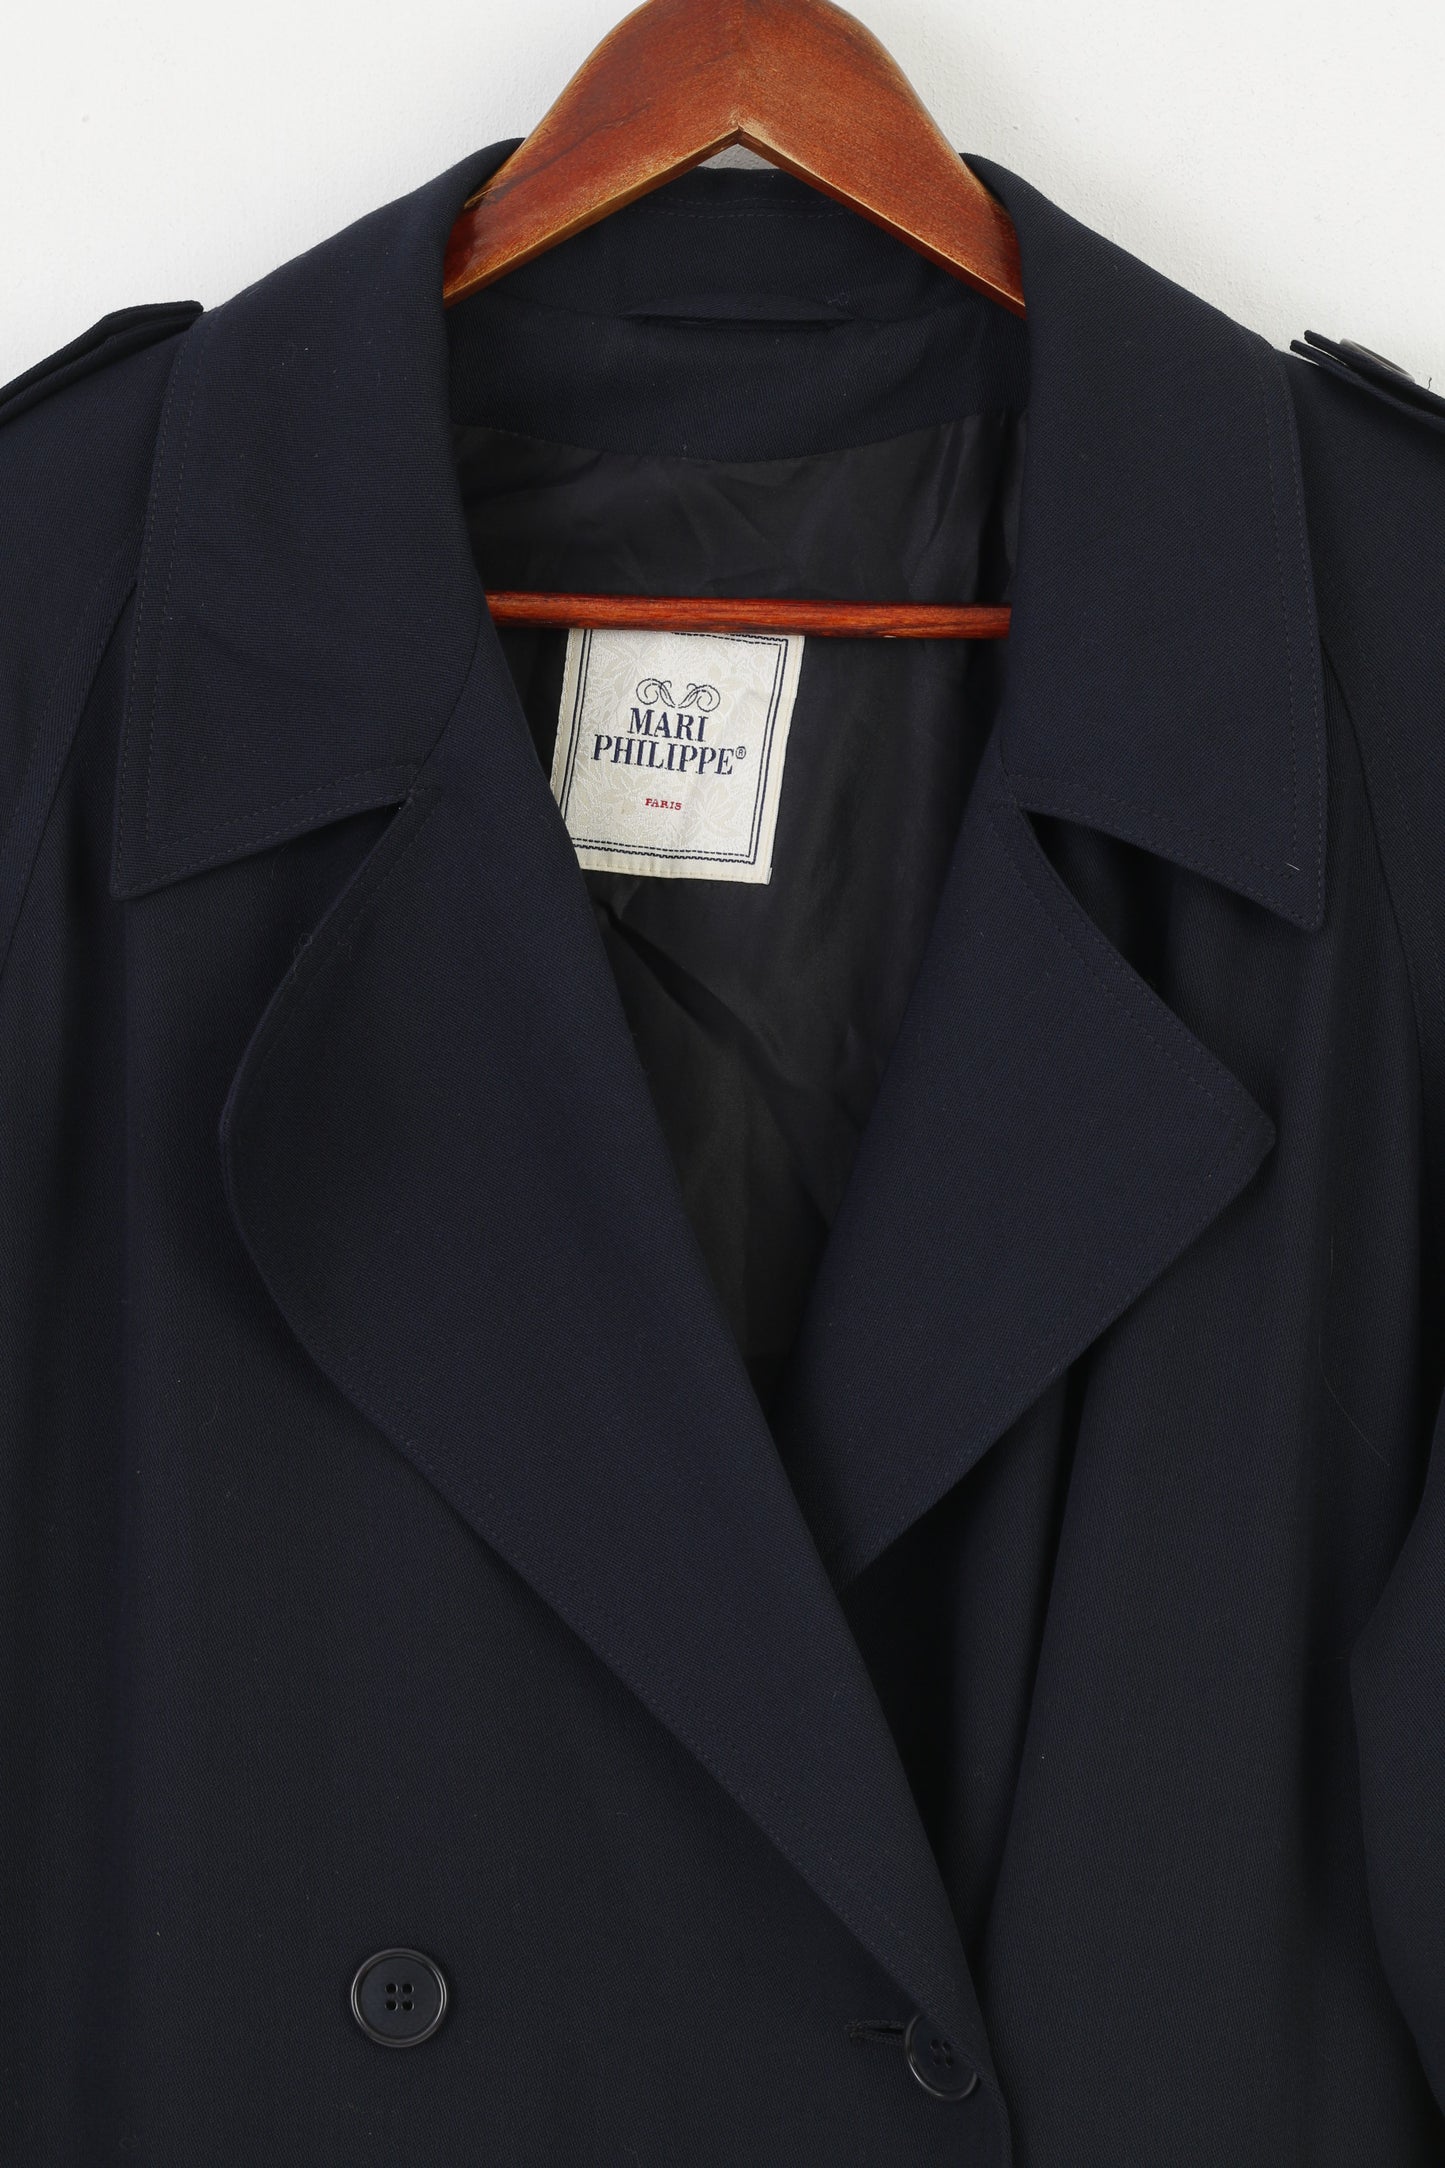 Mari Philippe Paris Women 16 42 XL Coat Navy Vintage Buttons Double Breasted Peacoat